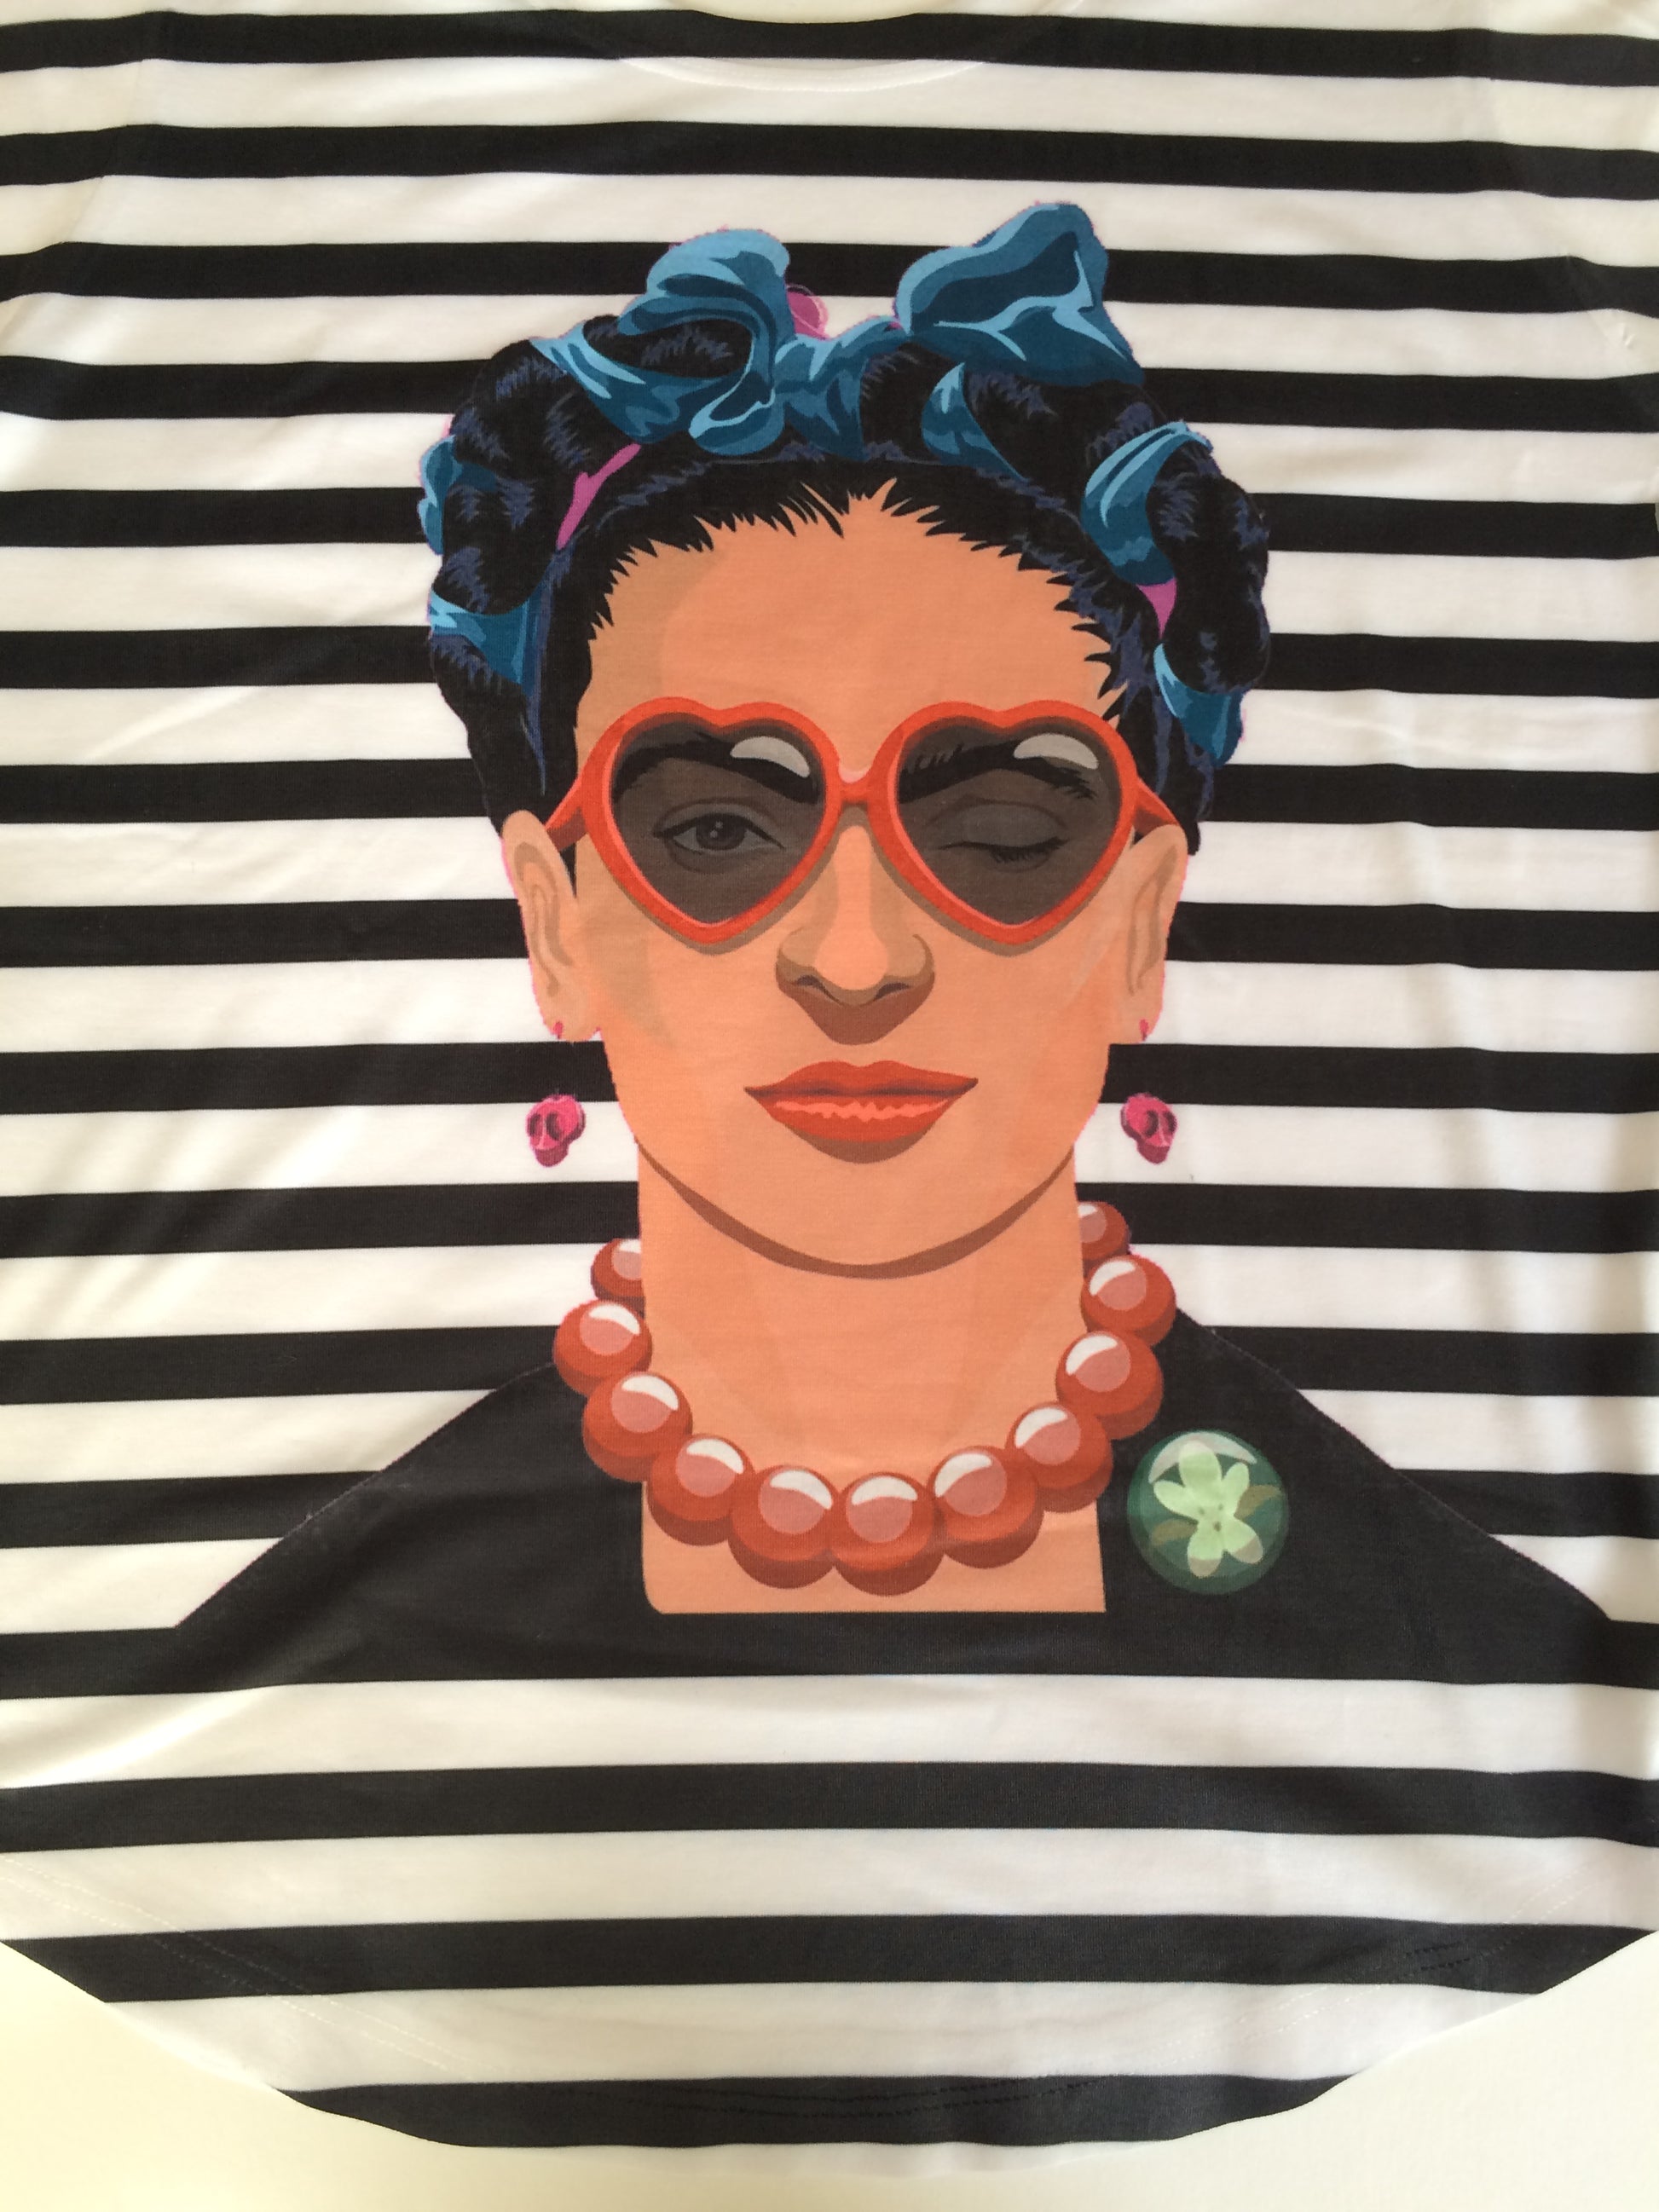 Frida Kahlo Graphic Tee Mexican T-Shirt Black Striped - The Little Pueblo